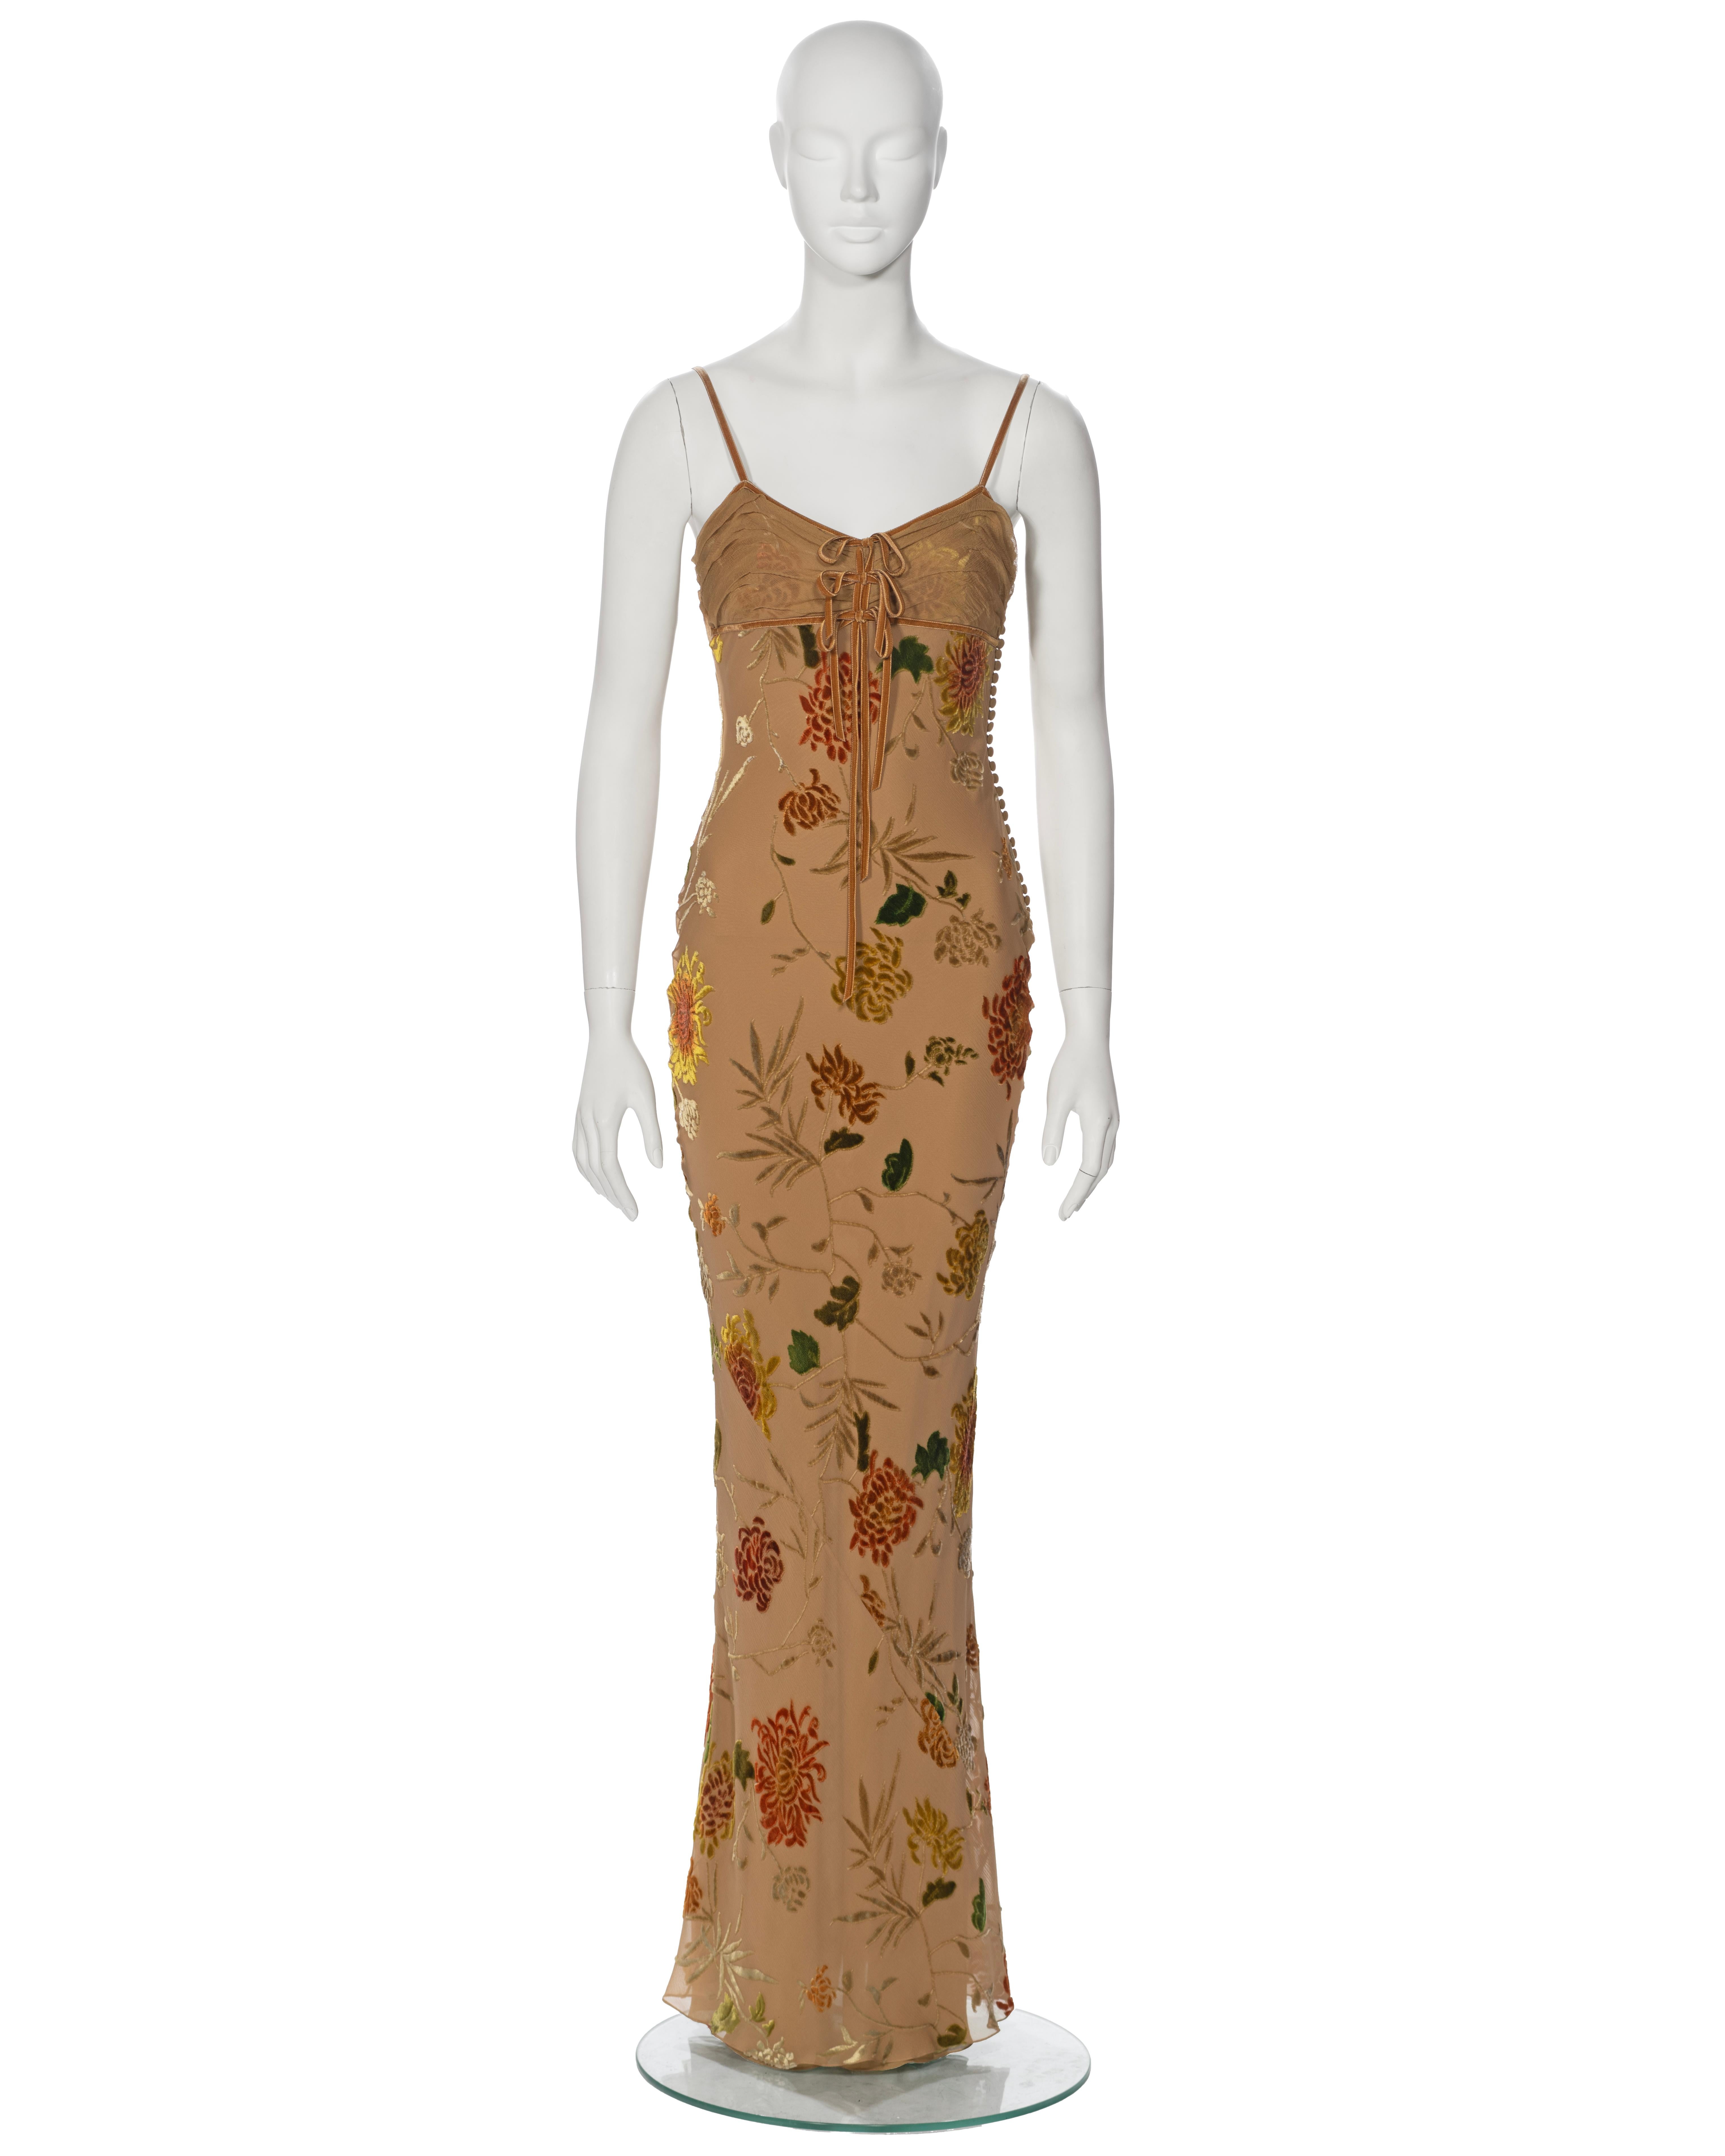 ▪ Archival Christian Dior Maxi Dress
▪ Creative Director: John Galliano
▪ Spring-Summer 2006
▪ Elegantly crafted from tan velvet devoré, this dress showcases a captivating floral motif in a palette of green, yellow, orange, and brown
▪ Sumptuous